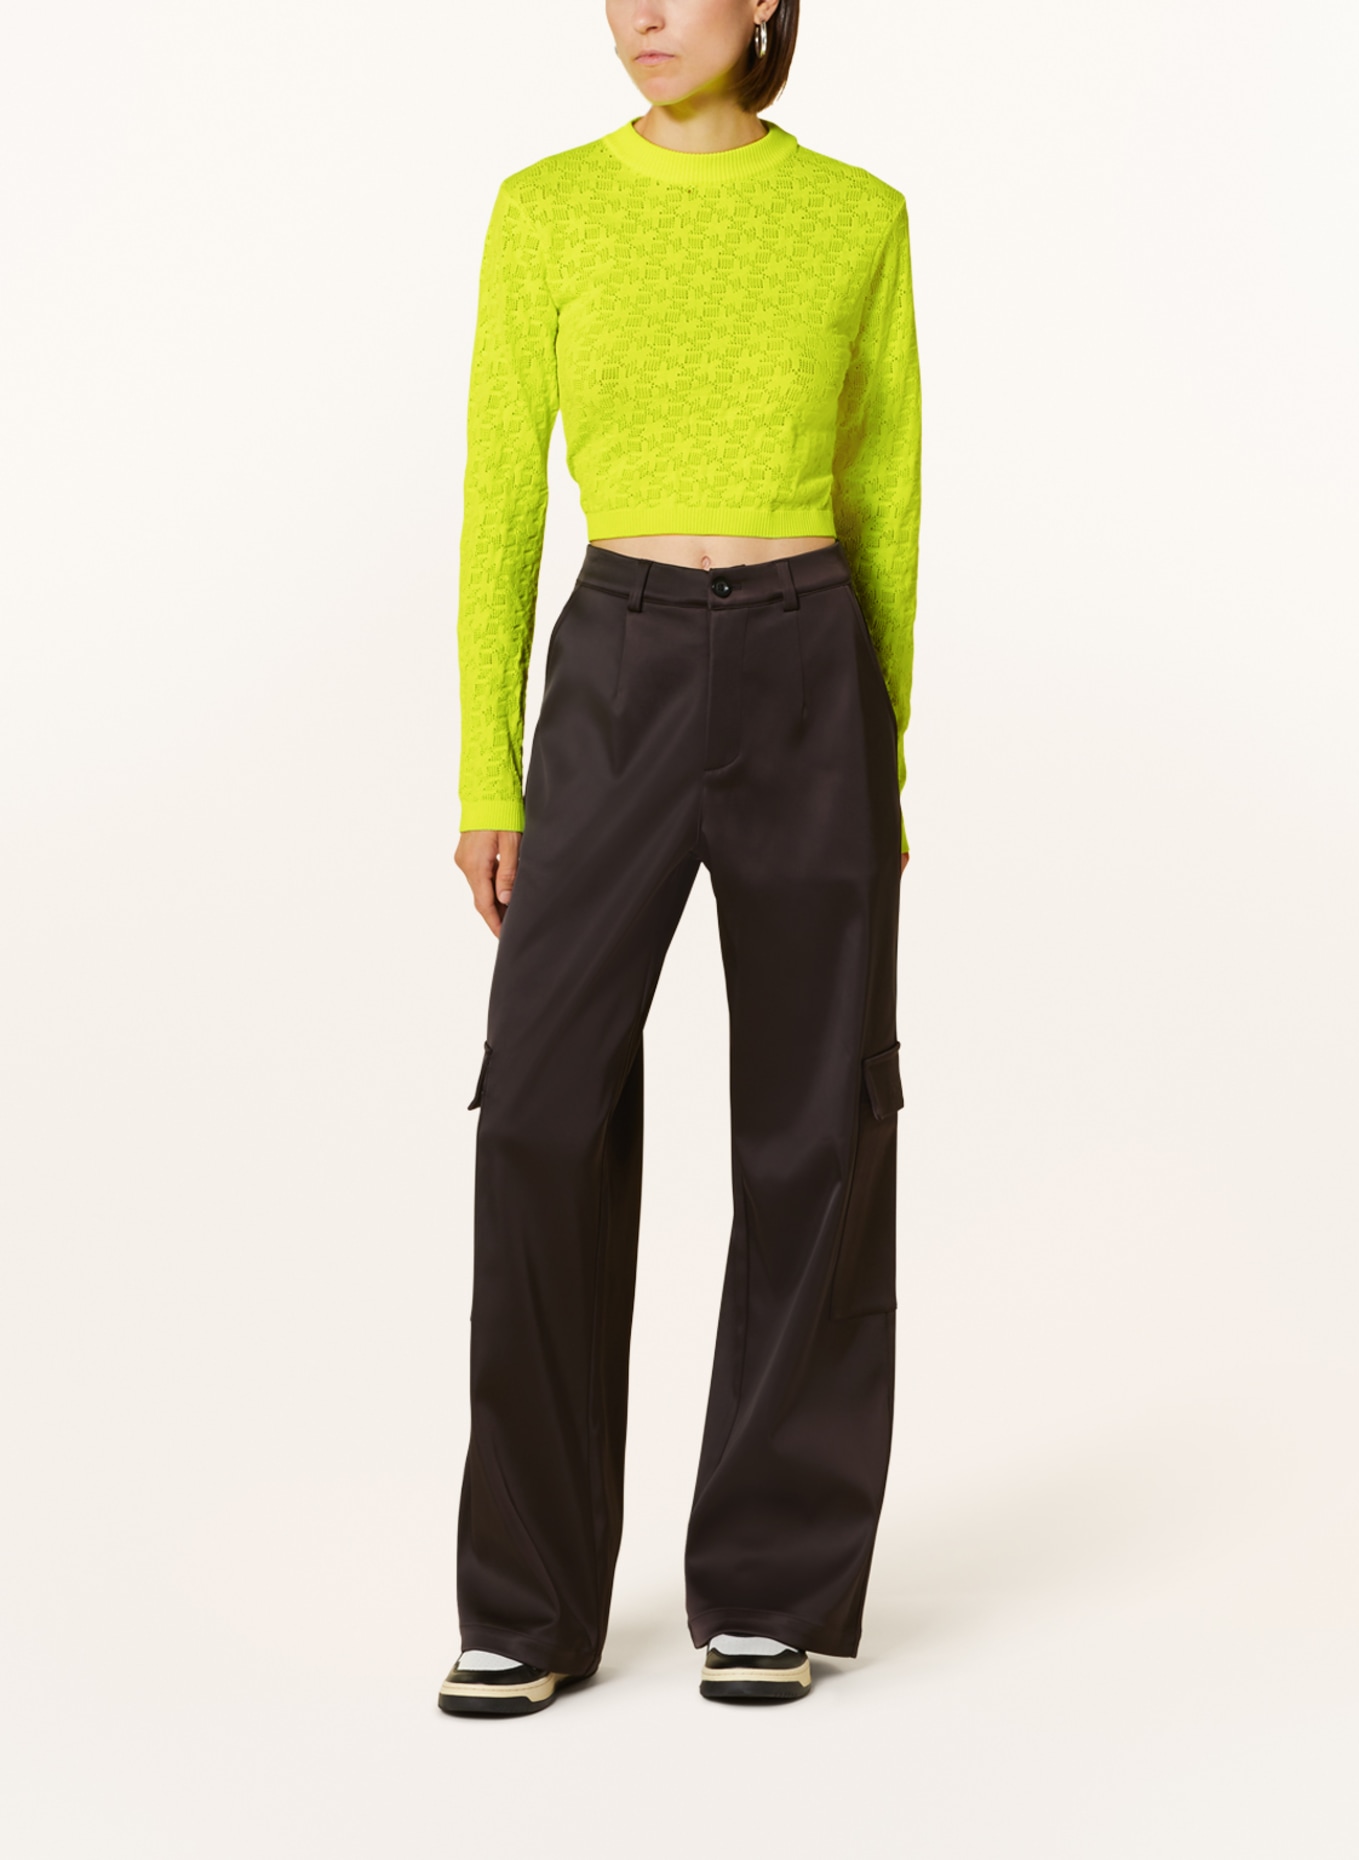 KARO KAUER Cropped sweater, Color: NEON YELLOW (Image 2)